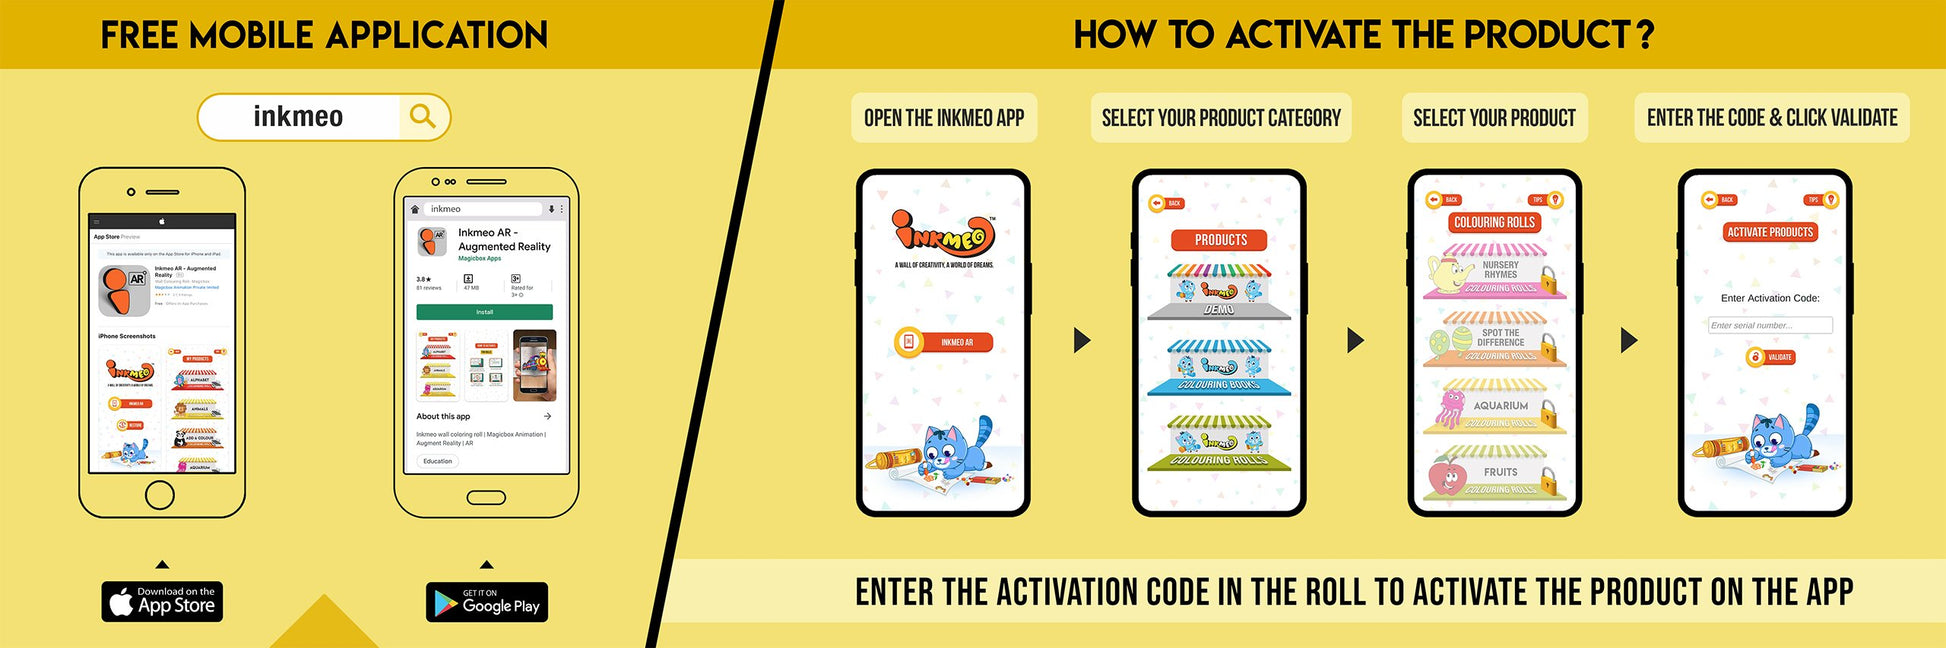 The image has a yellow background which is divided into two parts. The first part shows a free mobile application for downloading the Inkmeo app in the App Store and Google Store. The second part shows four mobile phones with the caption "To open the Inkmeo app, select your product category, select your product, and enter the code & click validate.